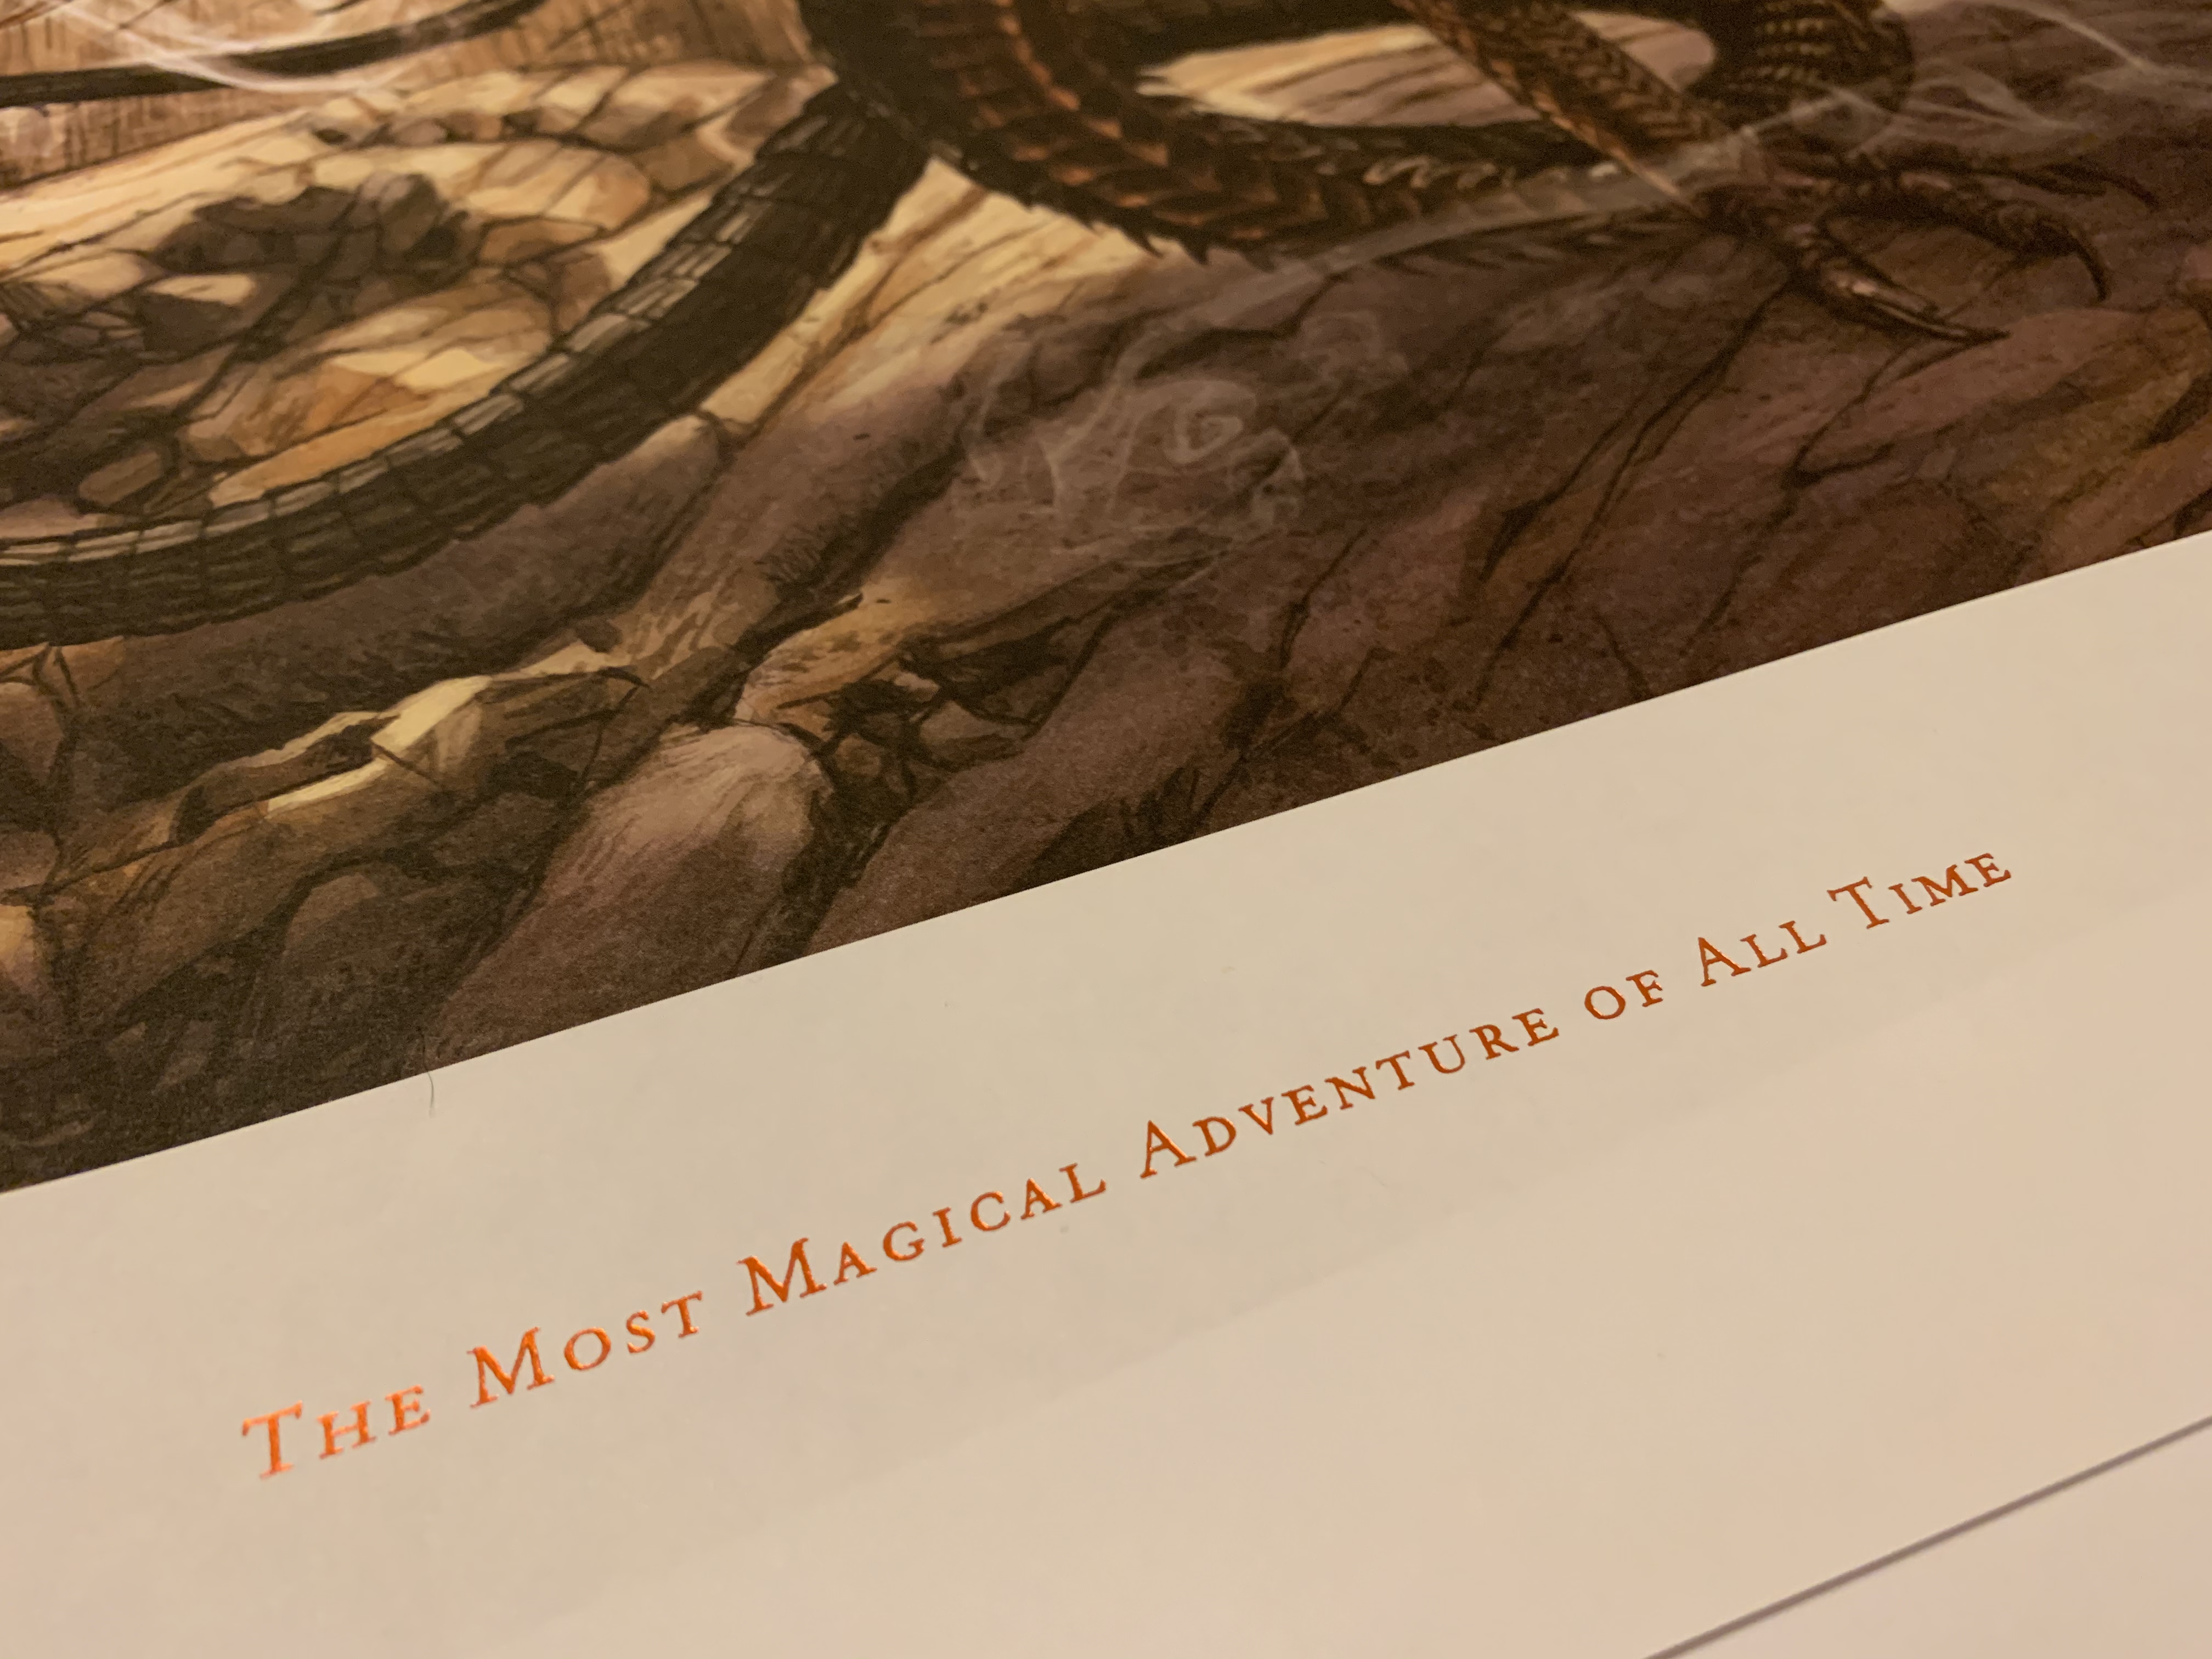 “Goblet of Fire” poster footer – “The Most Magical Adventure of All Time”